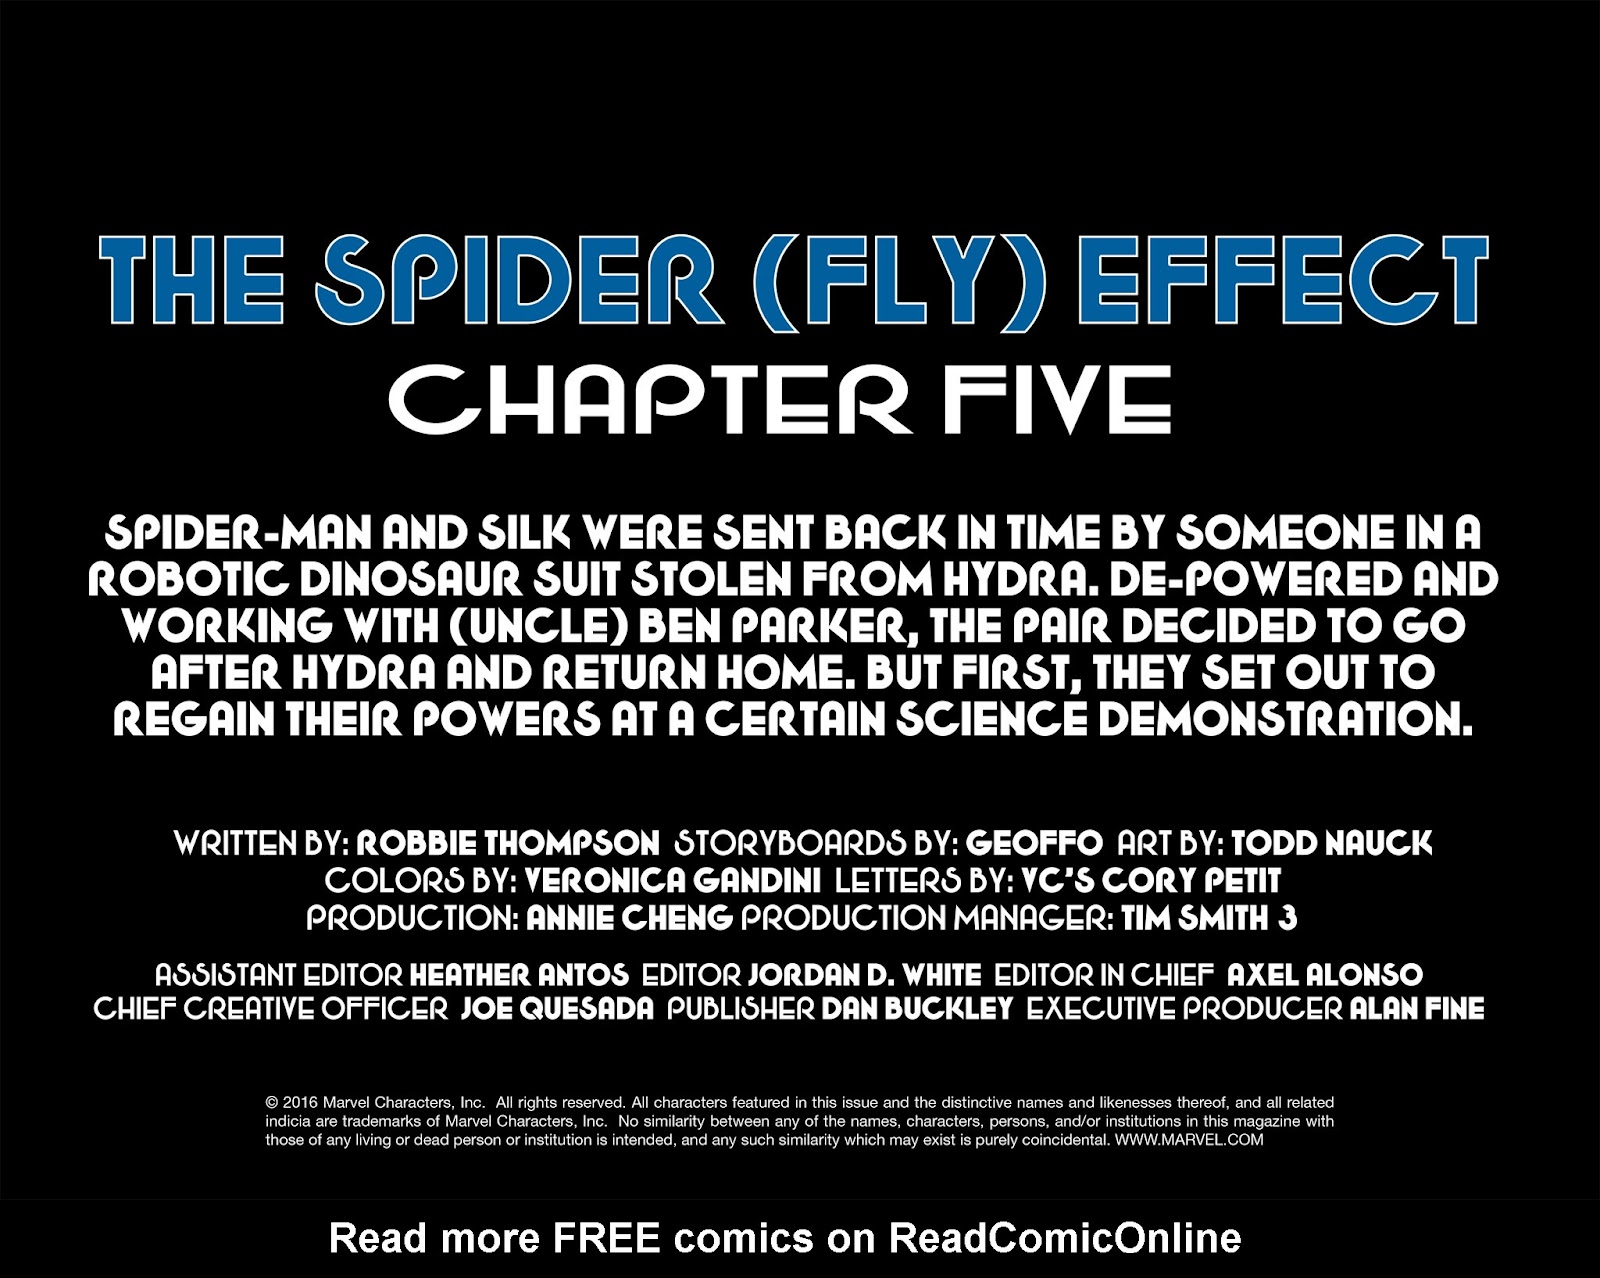 The Amazing Spider-Man & Silk: The Spider(fly) Effect (Infinite Comics) issue 5 - Page 8